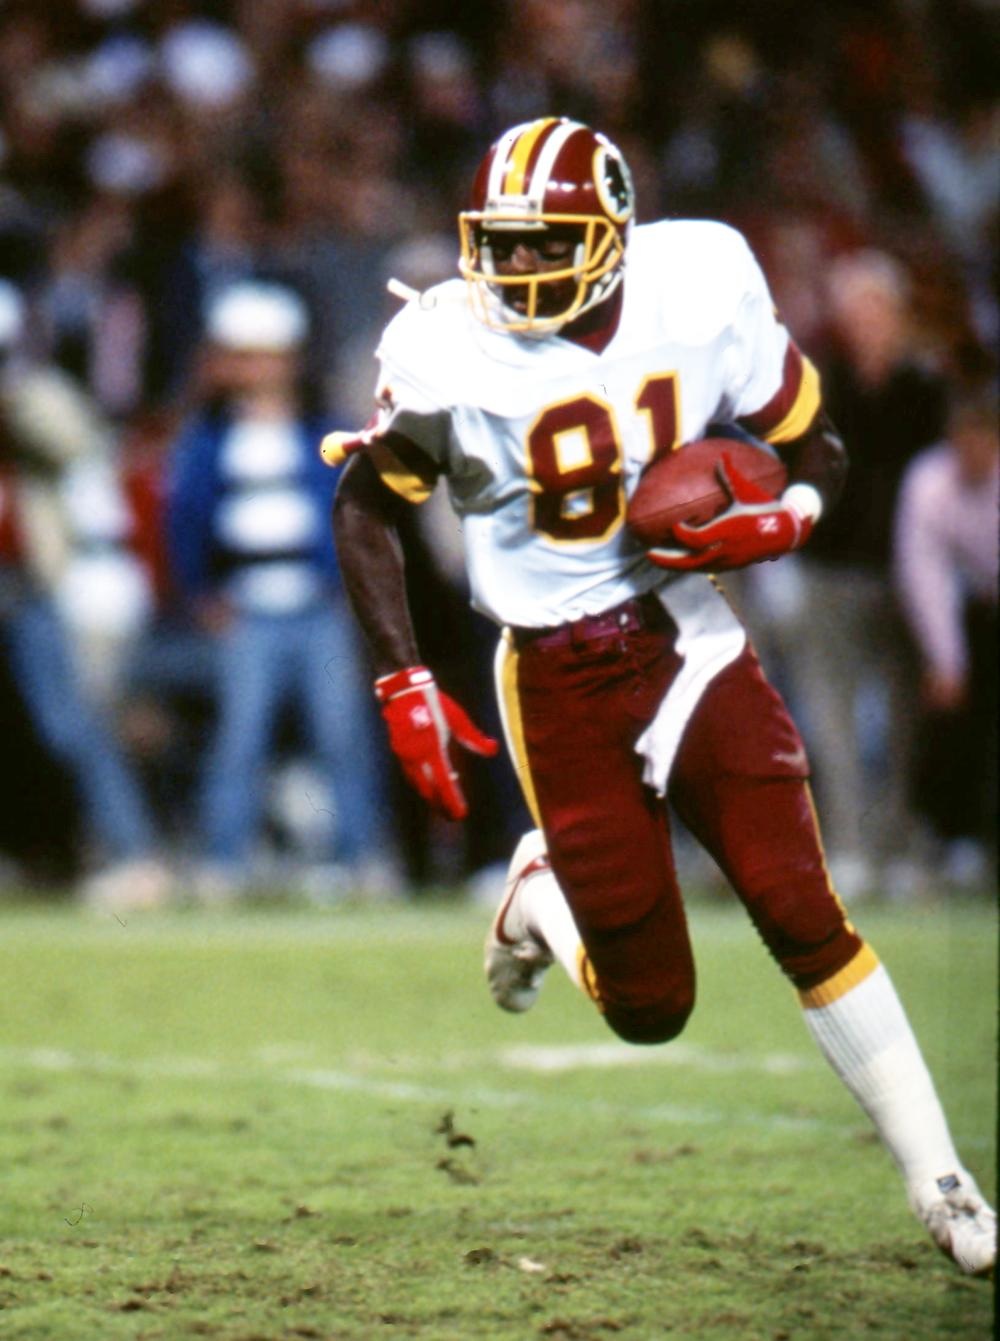 Art Monk runs up the field. Monk played 14 seasons with the Redskins. (Photo courtesy The Associated Press.)